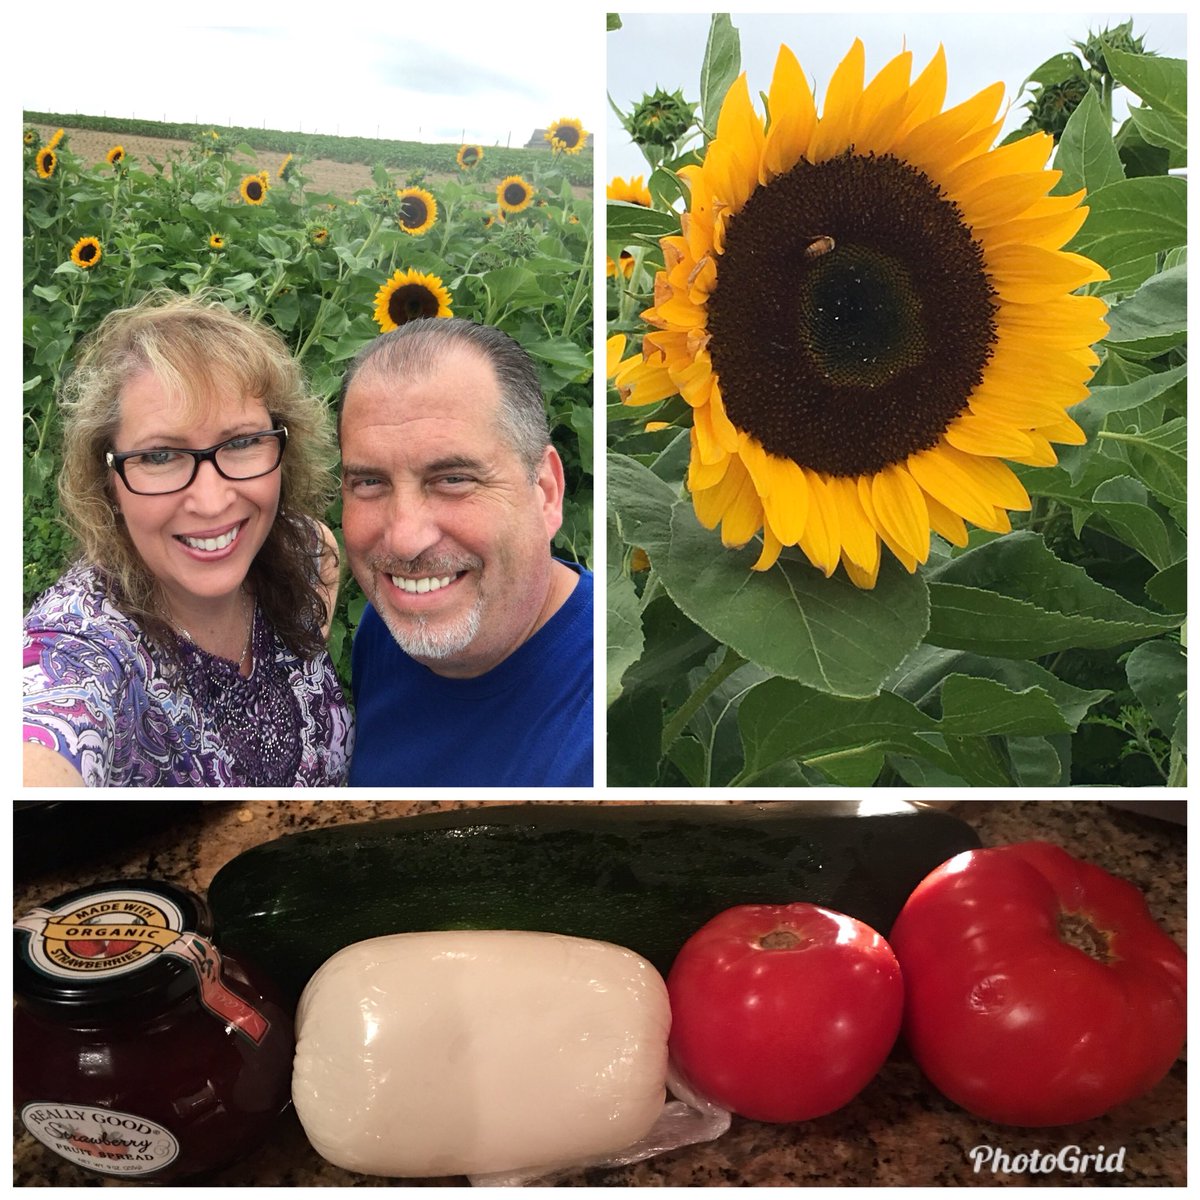 Fun day out East! #loveSunflowers #supportyourlocalfarmers